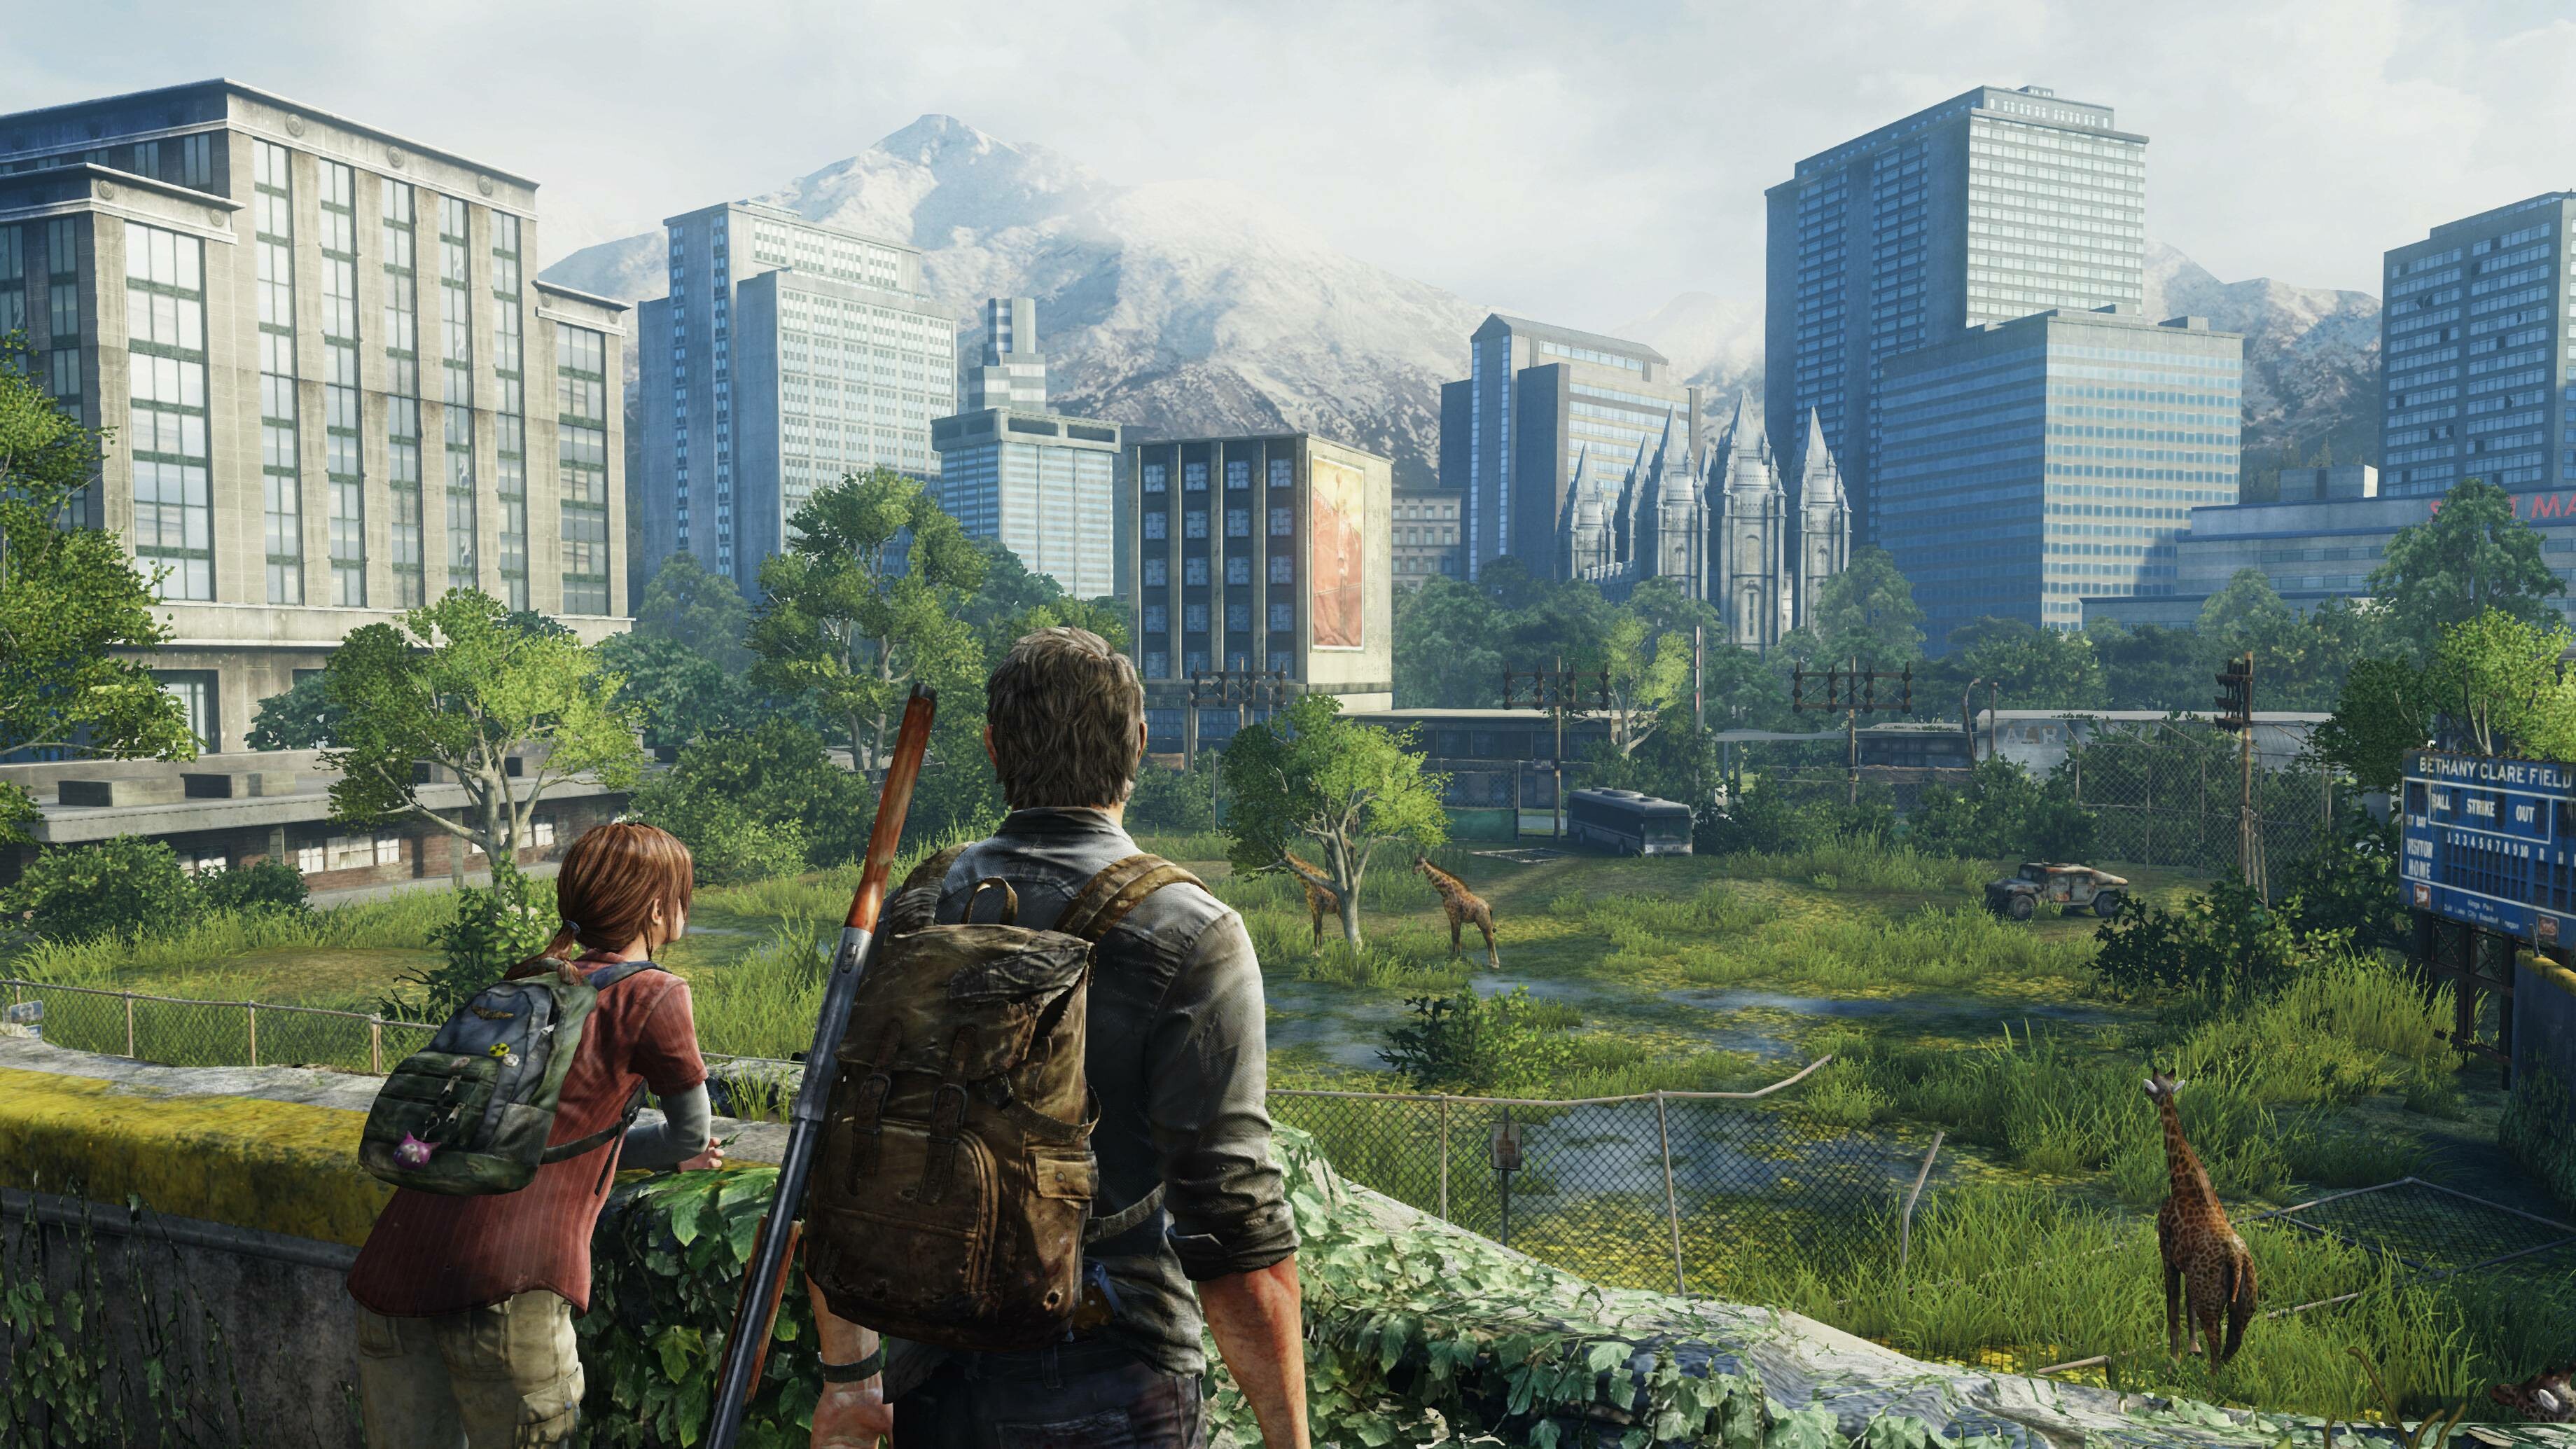 The Last of Us: It received critical acclaim, with praise for its narrative, gameplay, visuals, sound design, score, characterization, and depiction of female characters, Video game. 3680x2070 HD Background.